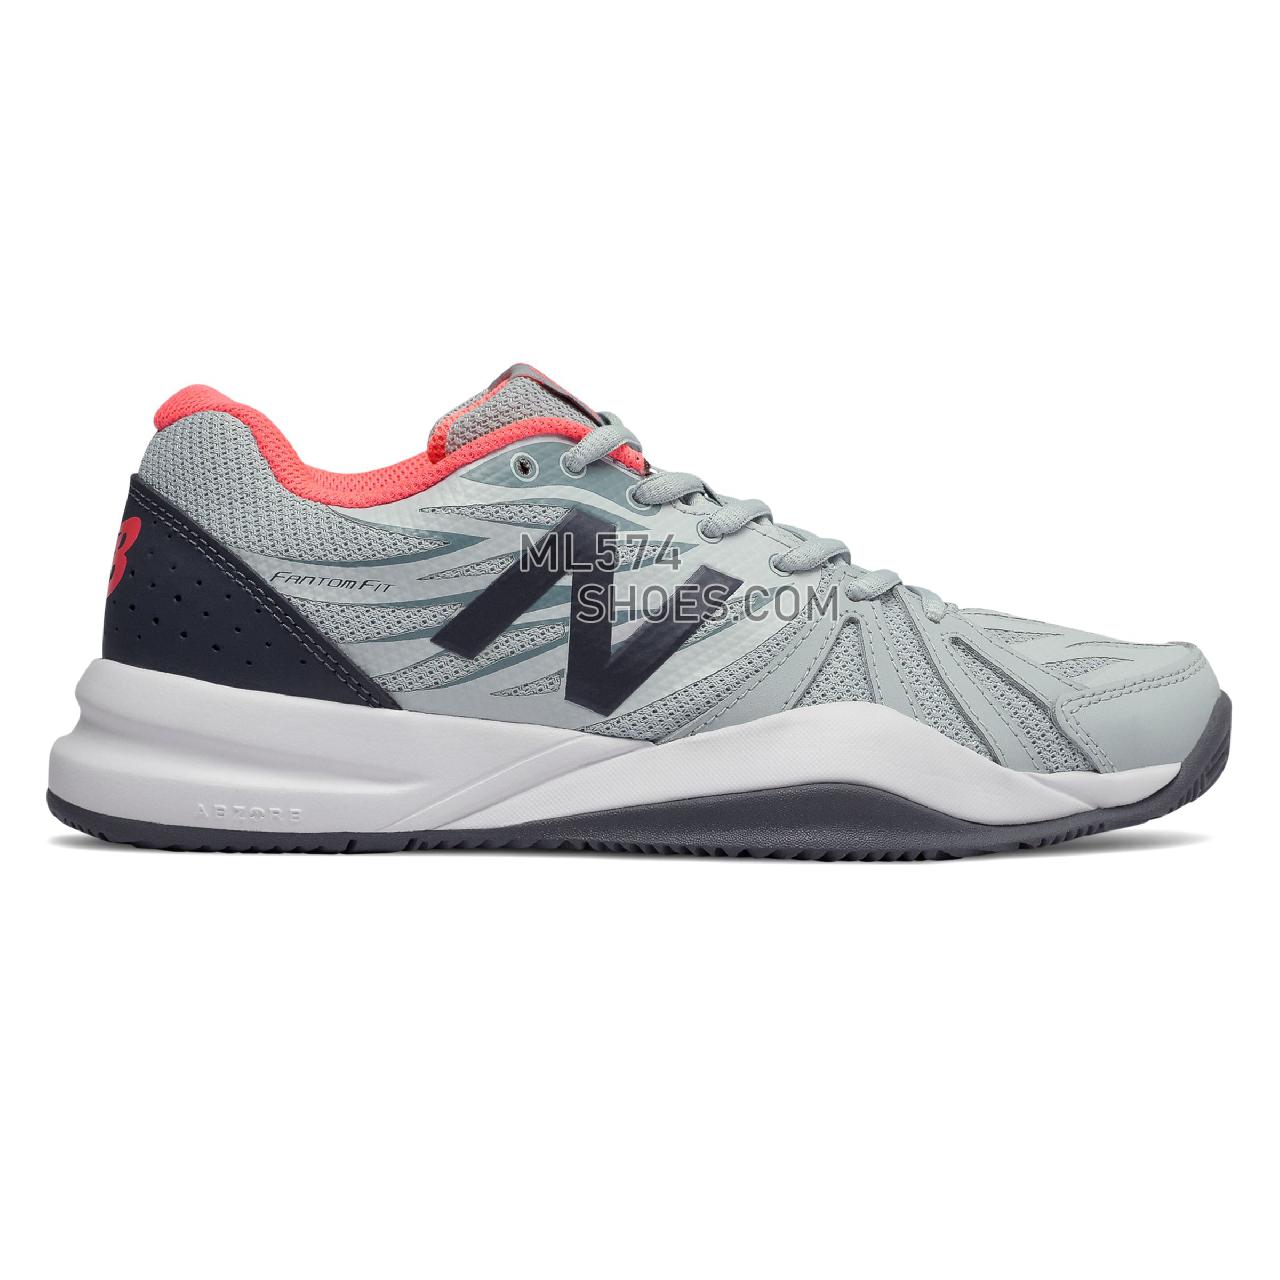 New Balance 786v2 - Women's 786 - Tennis / Court Light Cyclone with Dragonfly - WCH786L2